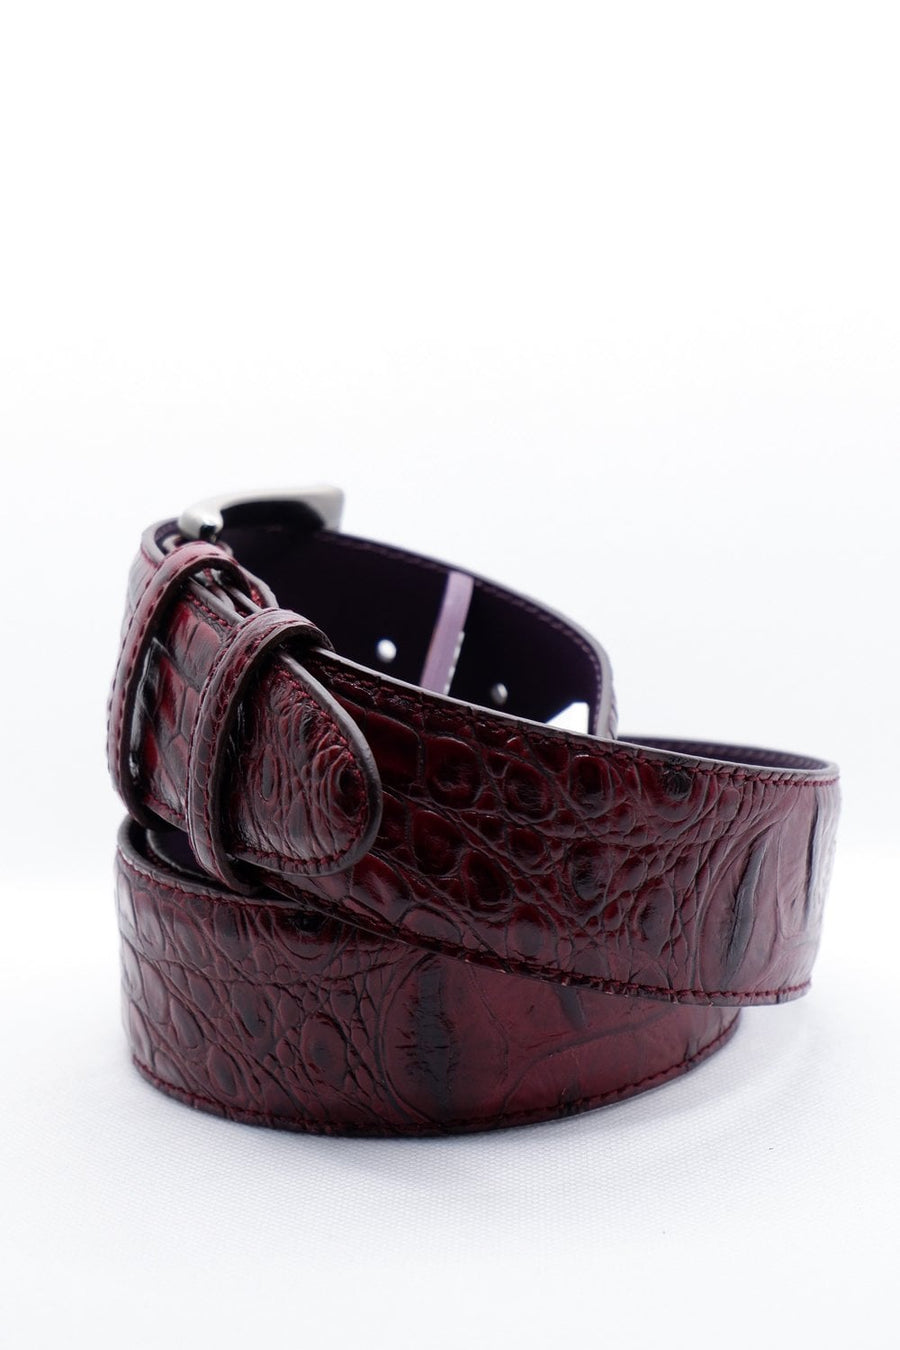 Buy the Elliot Rhodes Coco Jenny Mock Croc Belt in Burgundy at Intro. Spend £50 for free UK delivery. Official stockists. We ship worldwide.